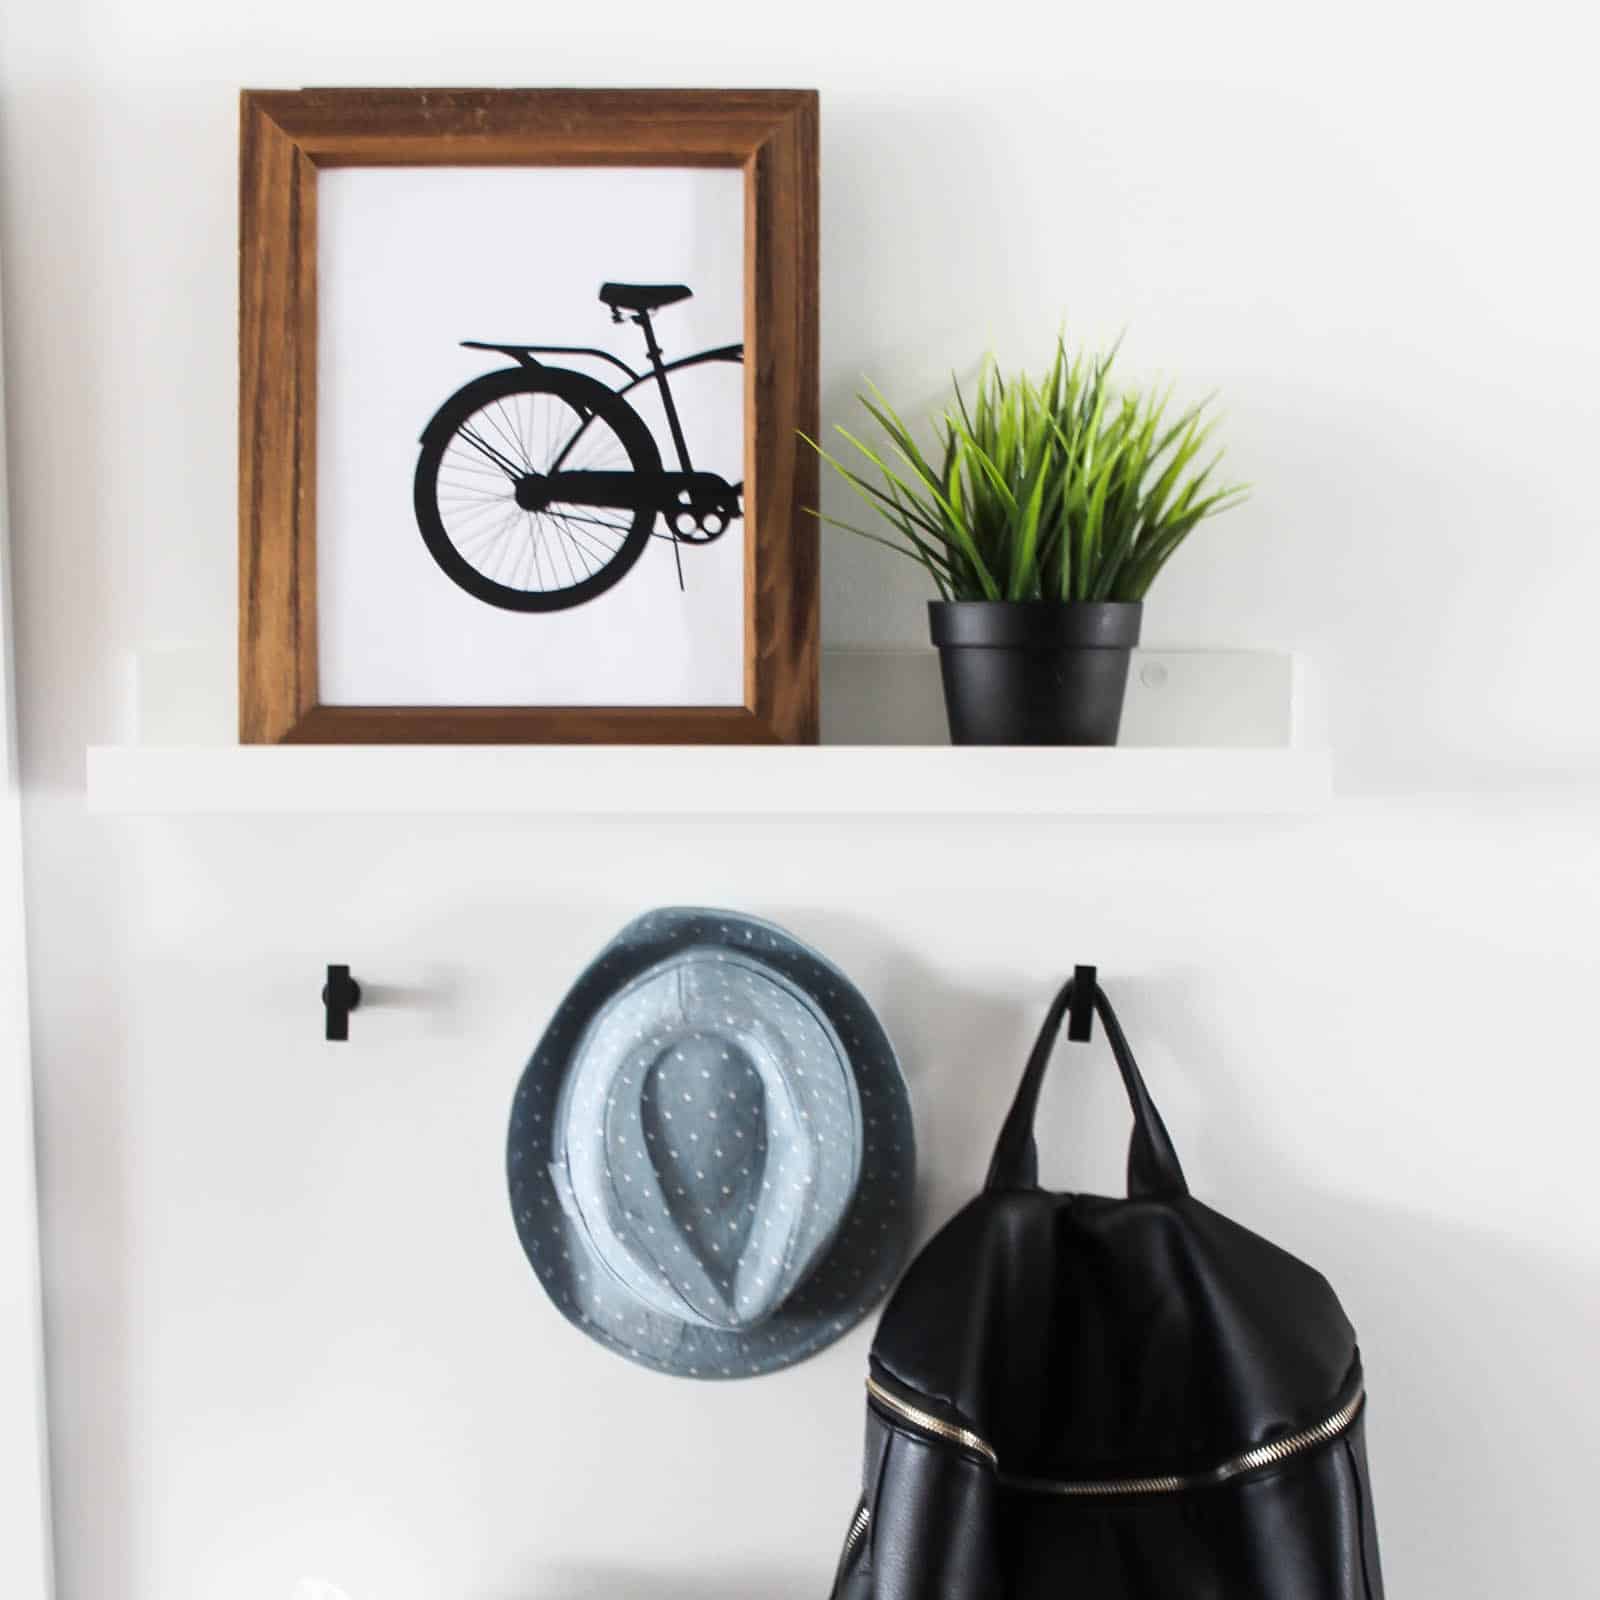 A Modern Free Printable to Spruce up your home for the Spring! Love these minimalist bicycle prints! Perfect for any season! #nordic #scandinavian #modernhome